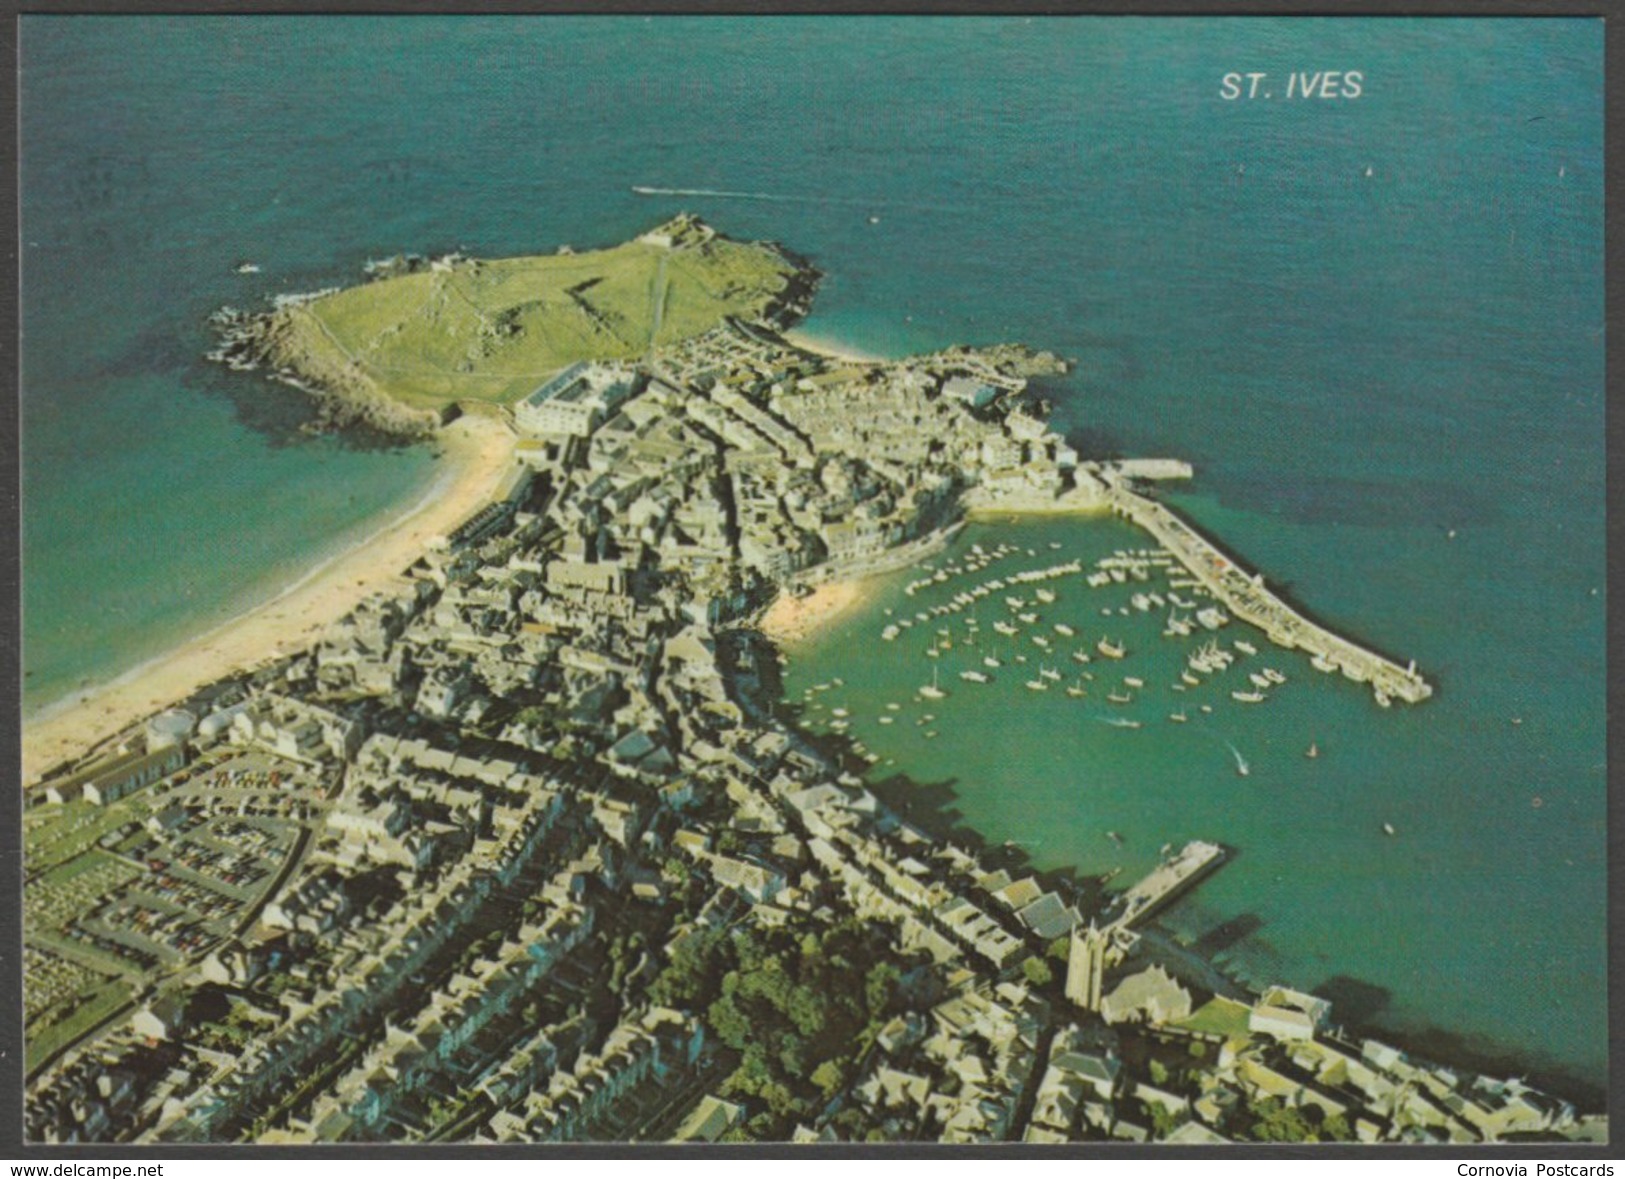 Aerial View Of St Ives, Cornwall, 1978 - Murray King Postcard - St.Ives